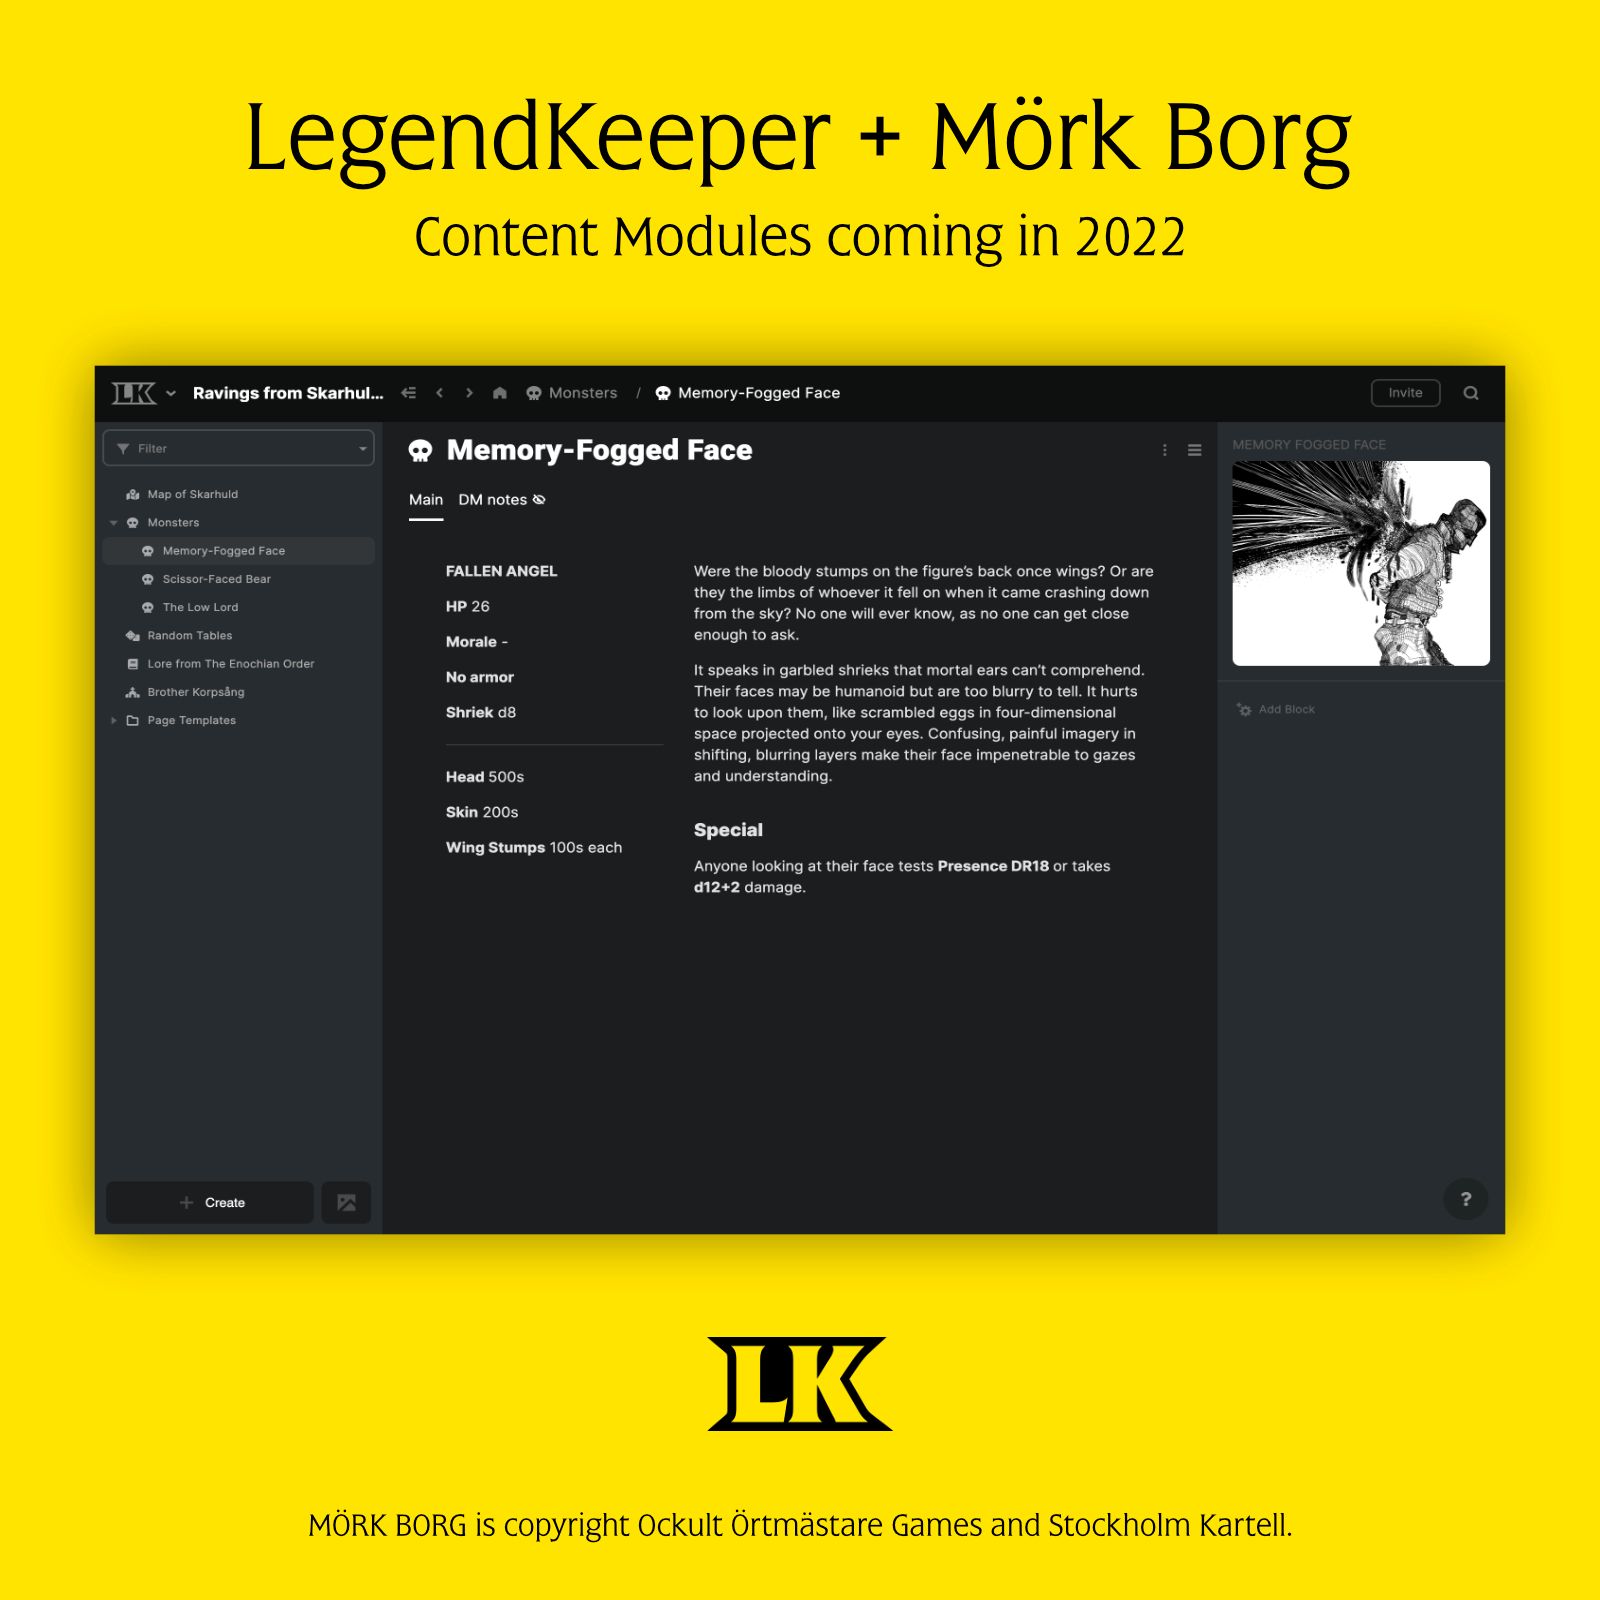 Wiki page for Mork Borg in LegendKeeper.